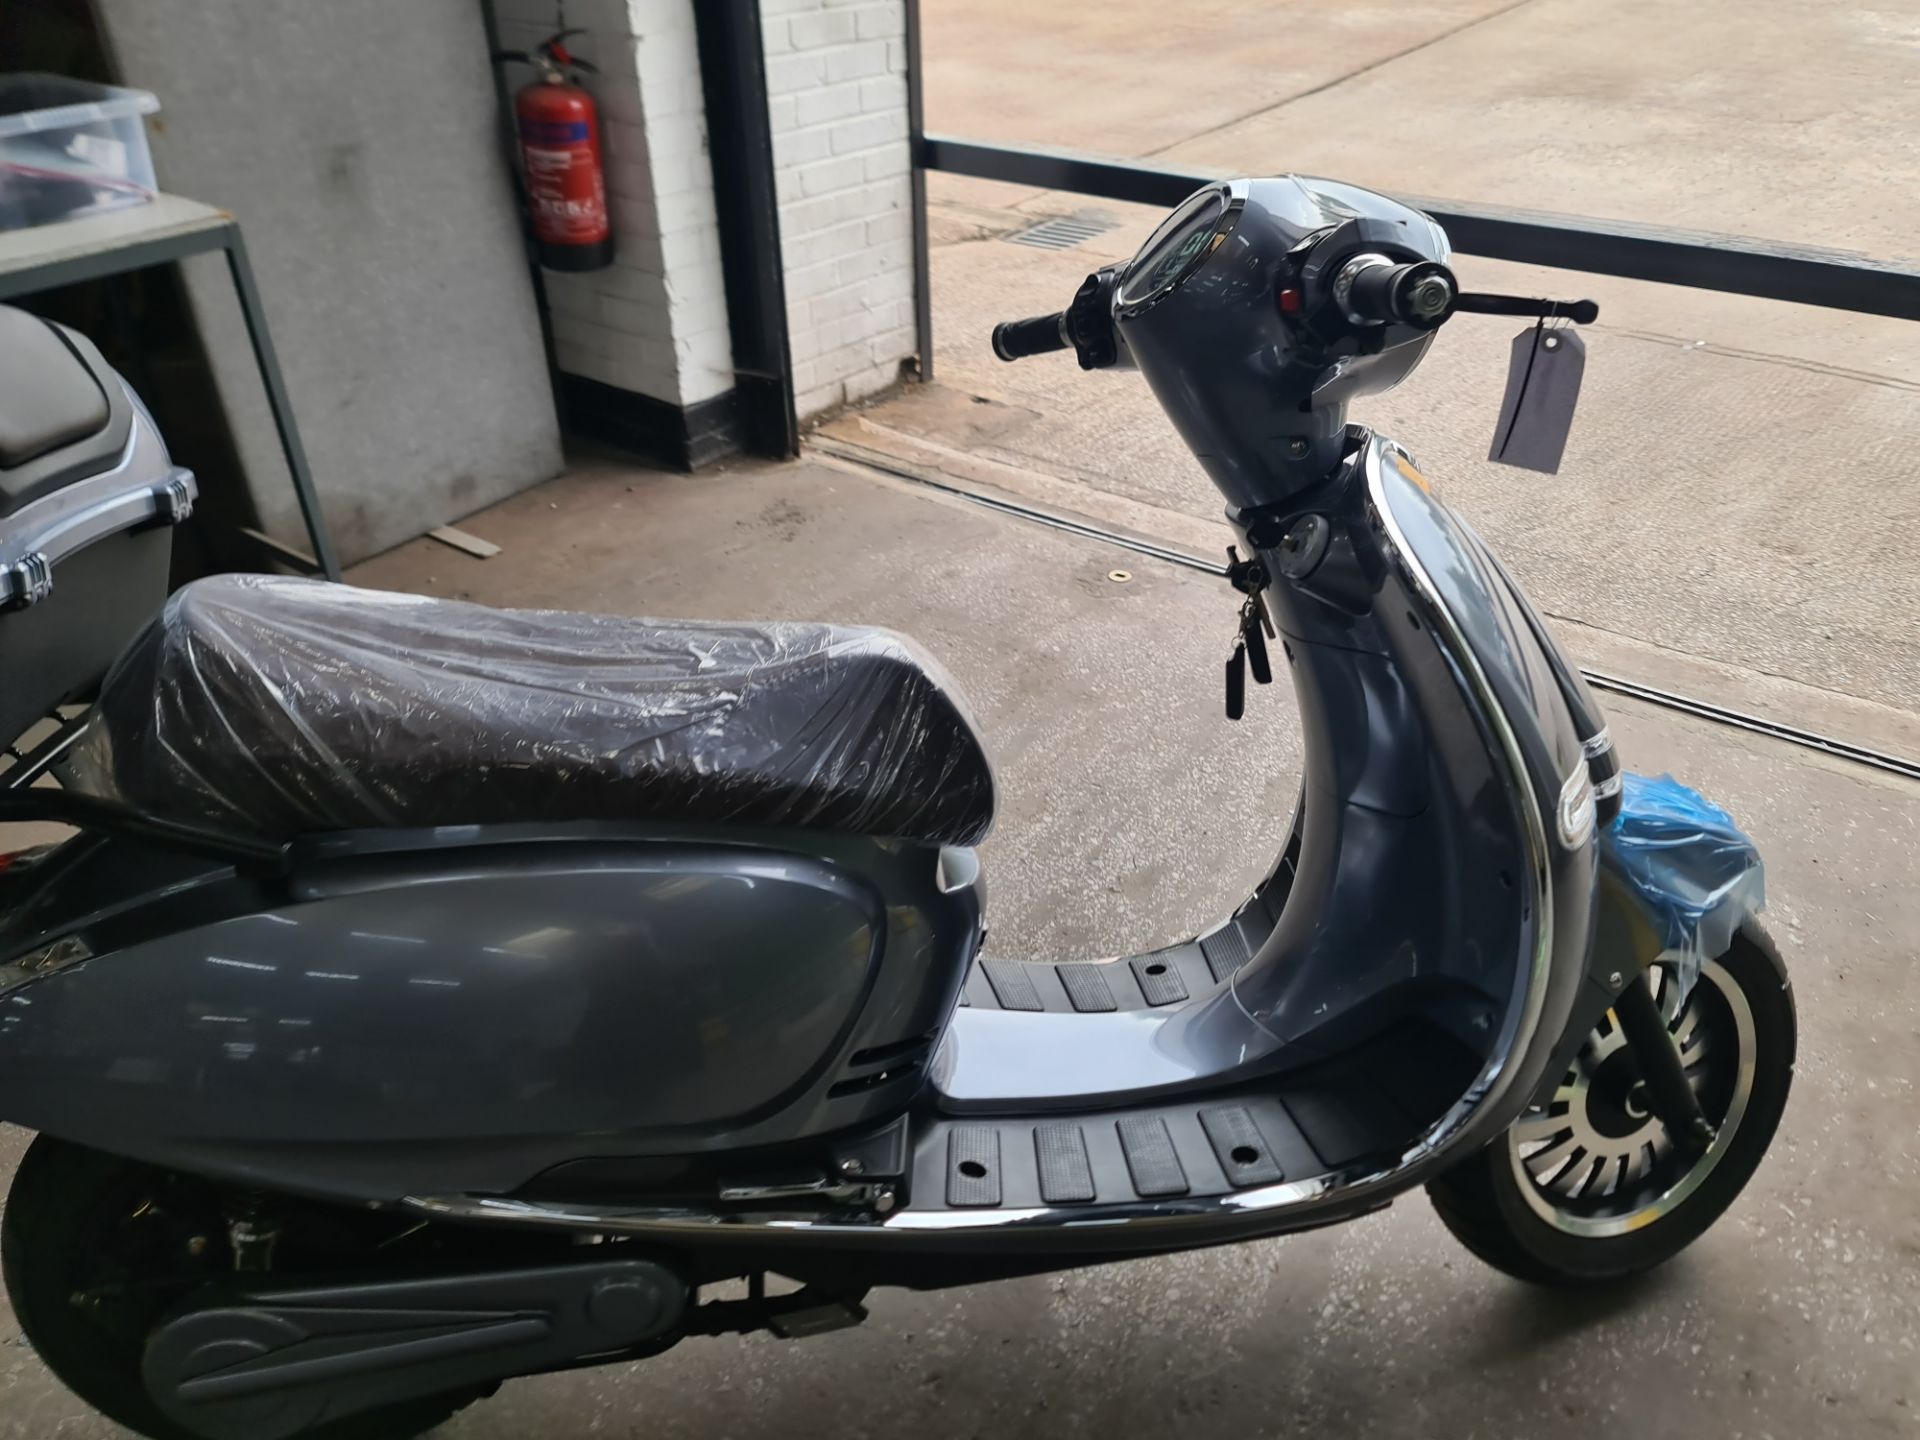 LR23 GVZ Ultra 4000 electric scooter, colour: grey, 125cc equivalent, 50mph top speed, 50 mile range - Image 11 of 28